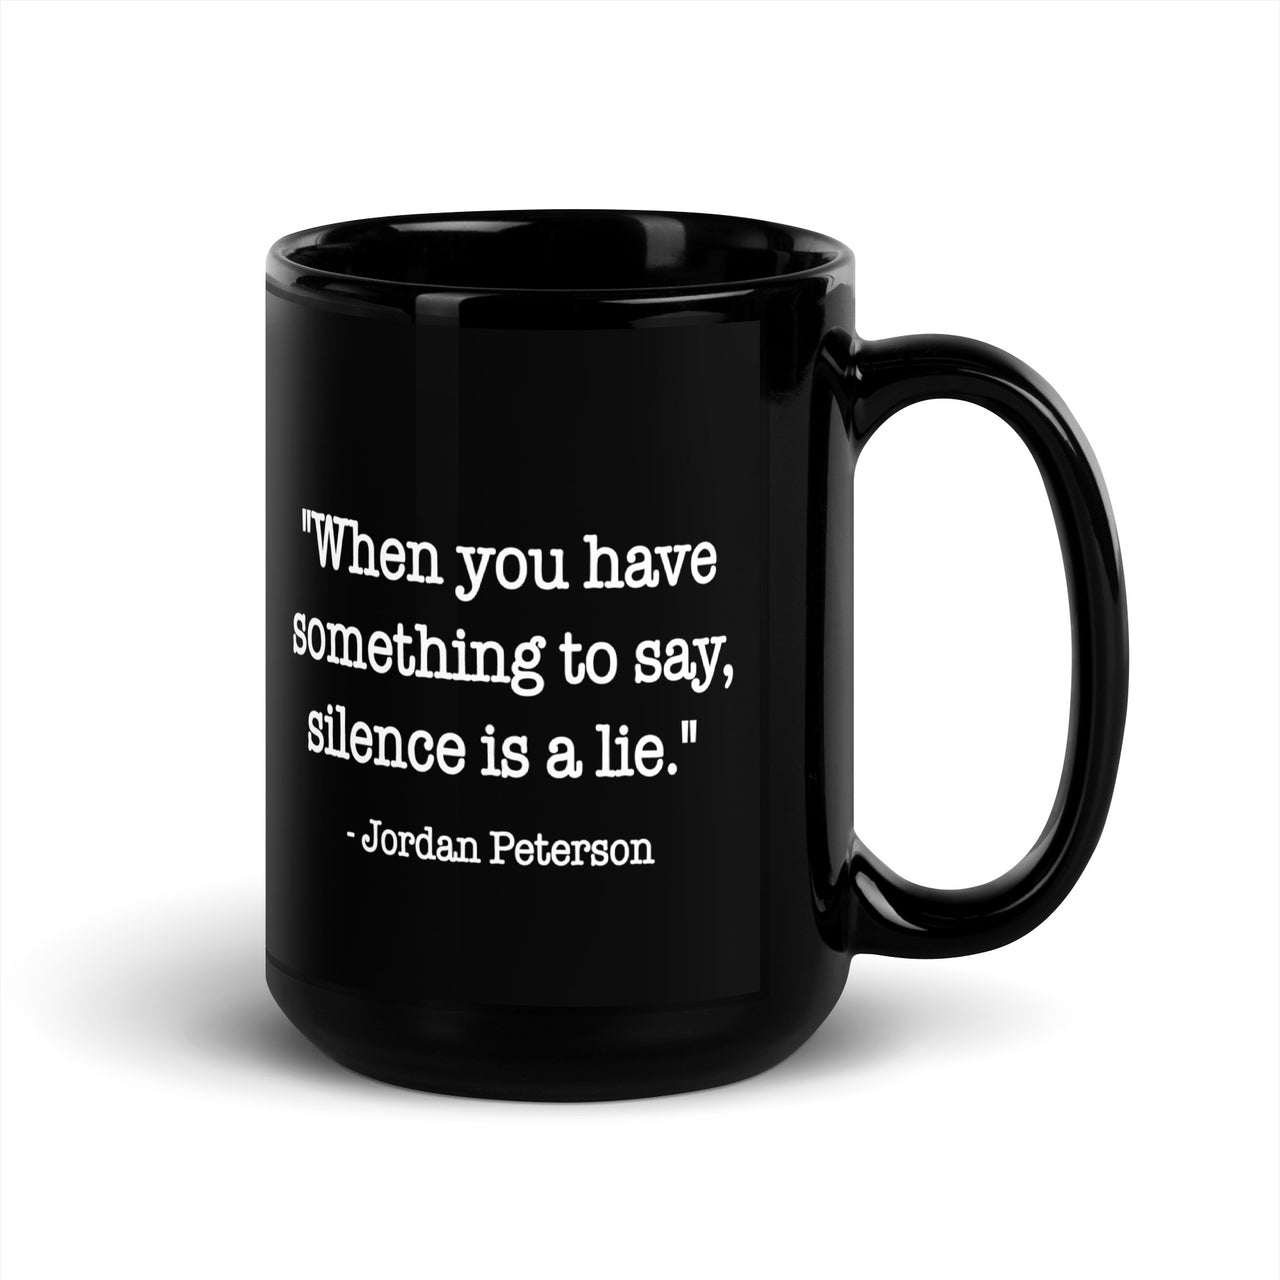 "When you have something to say, silence is a lie." - Jordan Peterson - Black Glossy Mug - Shady Lion Coffee Co.